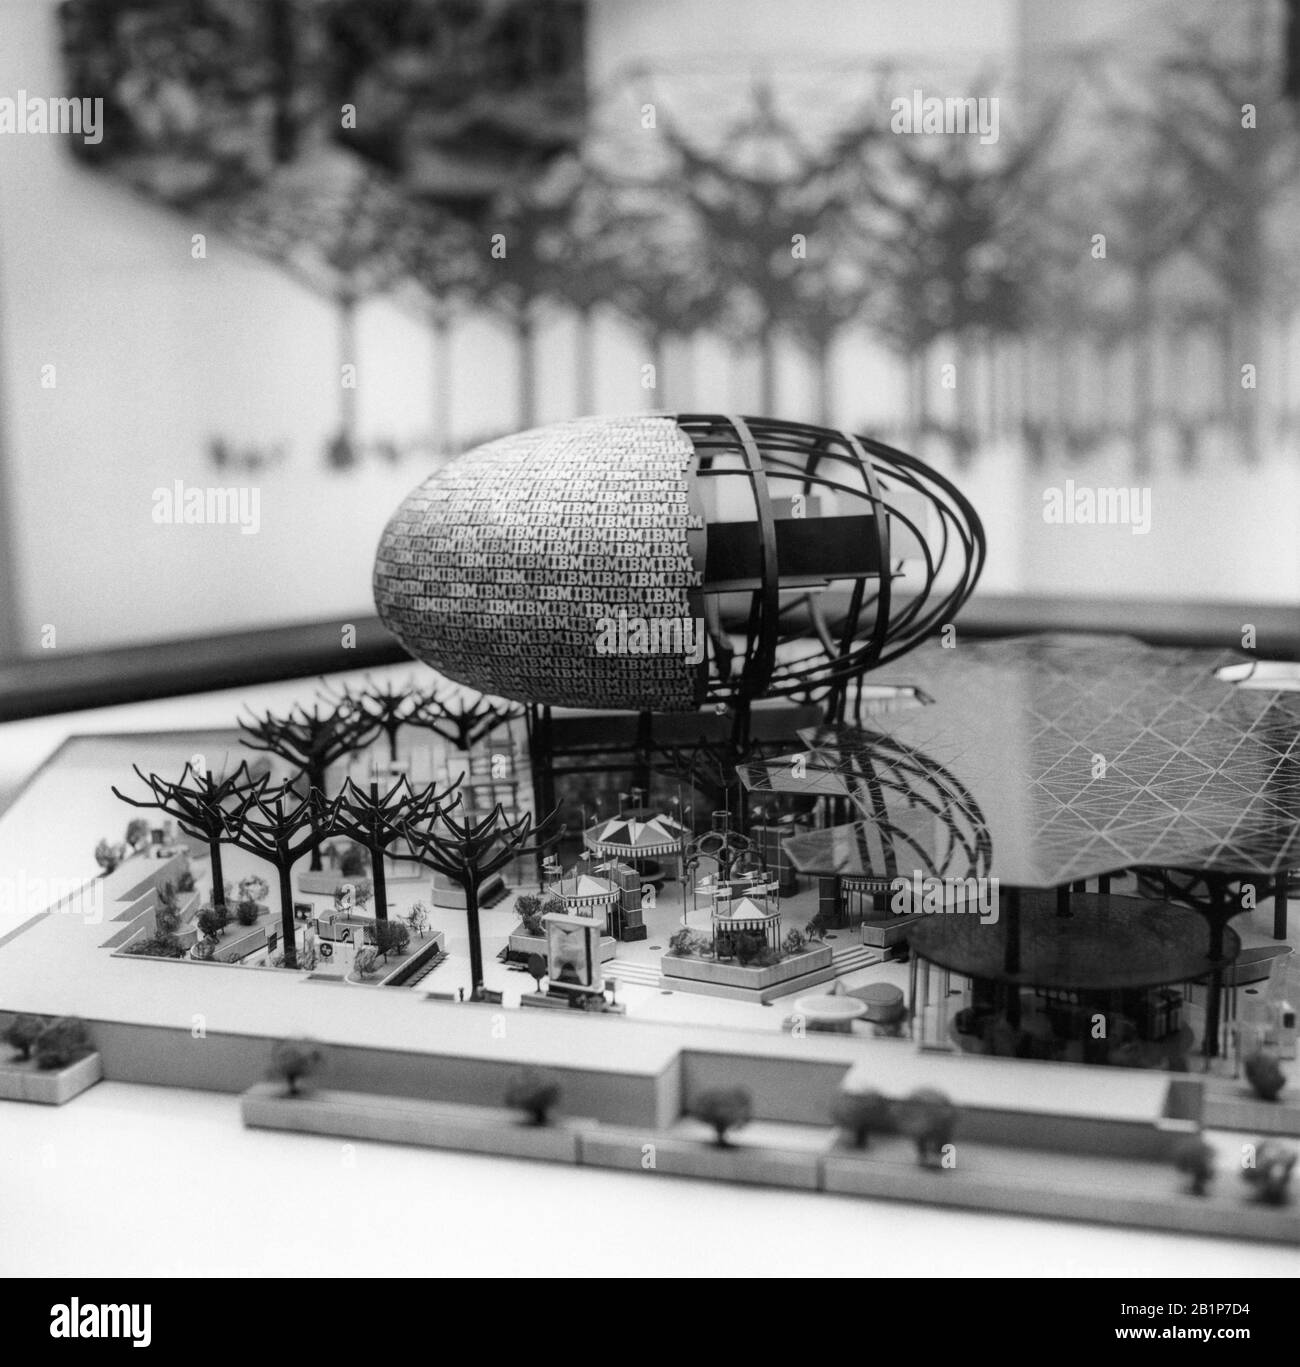 Charles Eames and Eero Saarinen architectural design model of the IBM pavilion with man-made steel trees and Ovoid Theater for the 1964 New York World's Fair. The pavilion model was on display at the IBM Business Show in Manhattan at the New York Coliseum, circa April 30, 1963. Stock Photo